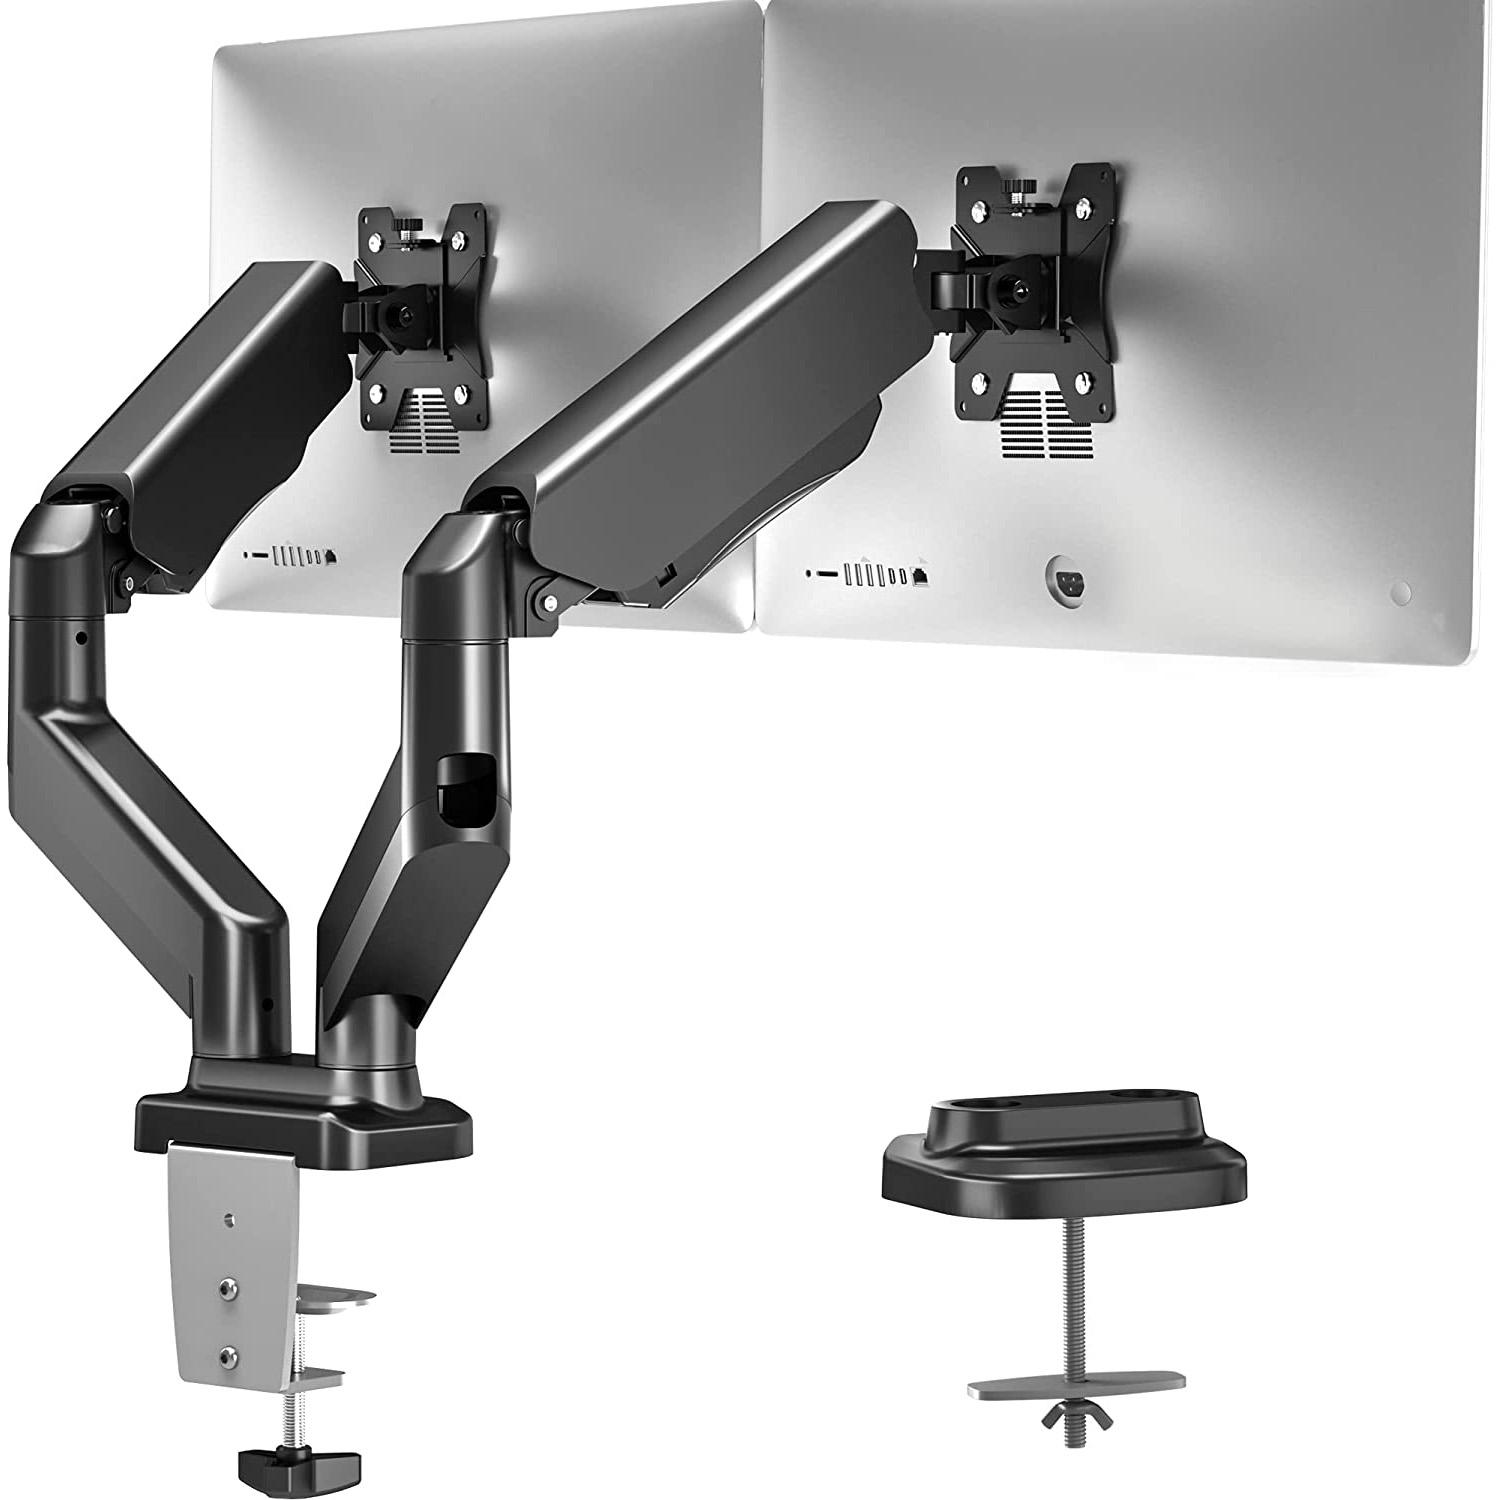 Dual-Arm Gas Spring Desktop Monitor Mount for $27.99 Shipped